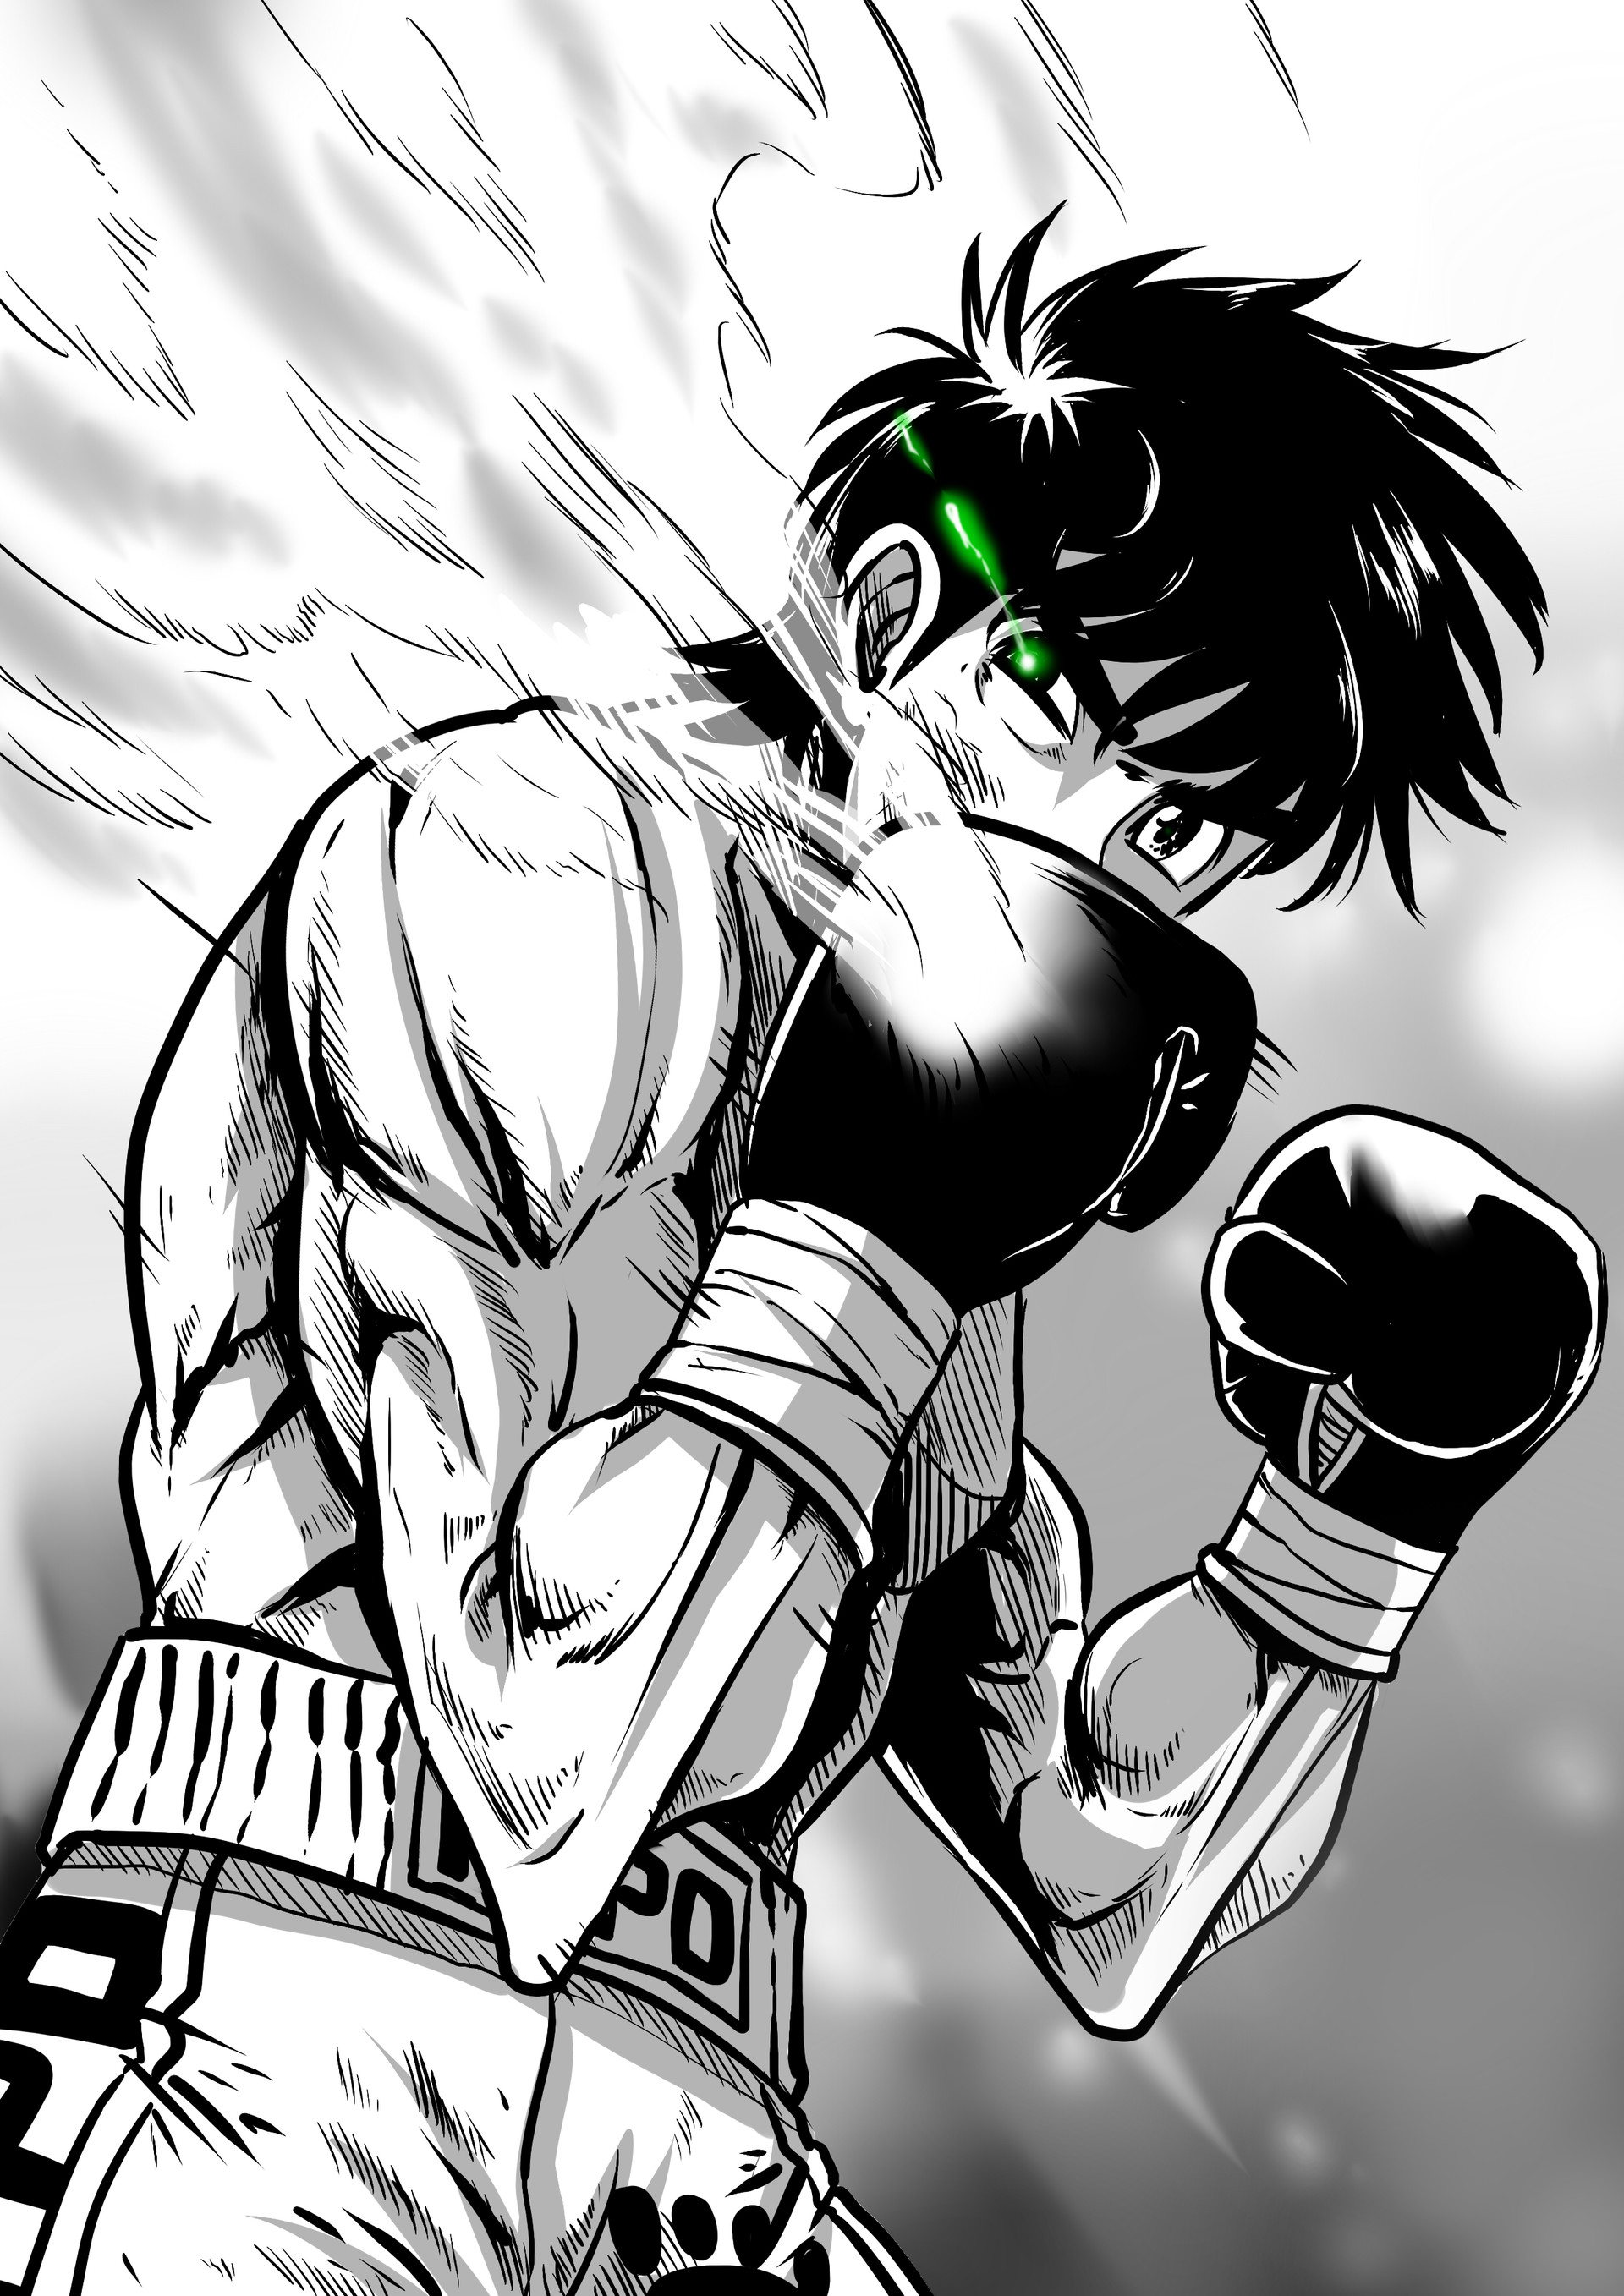 From The Fighter (Hajime no Ippo) .